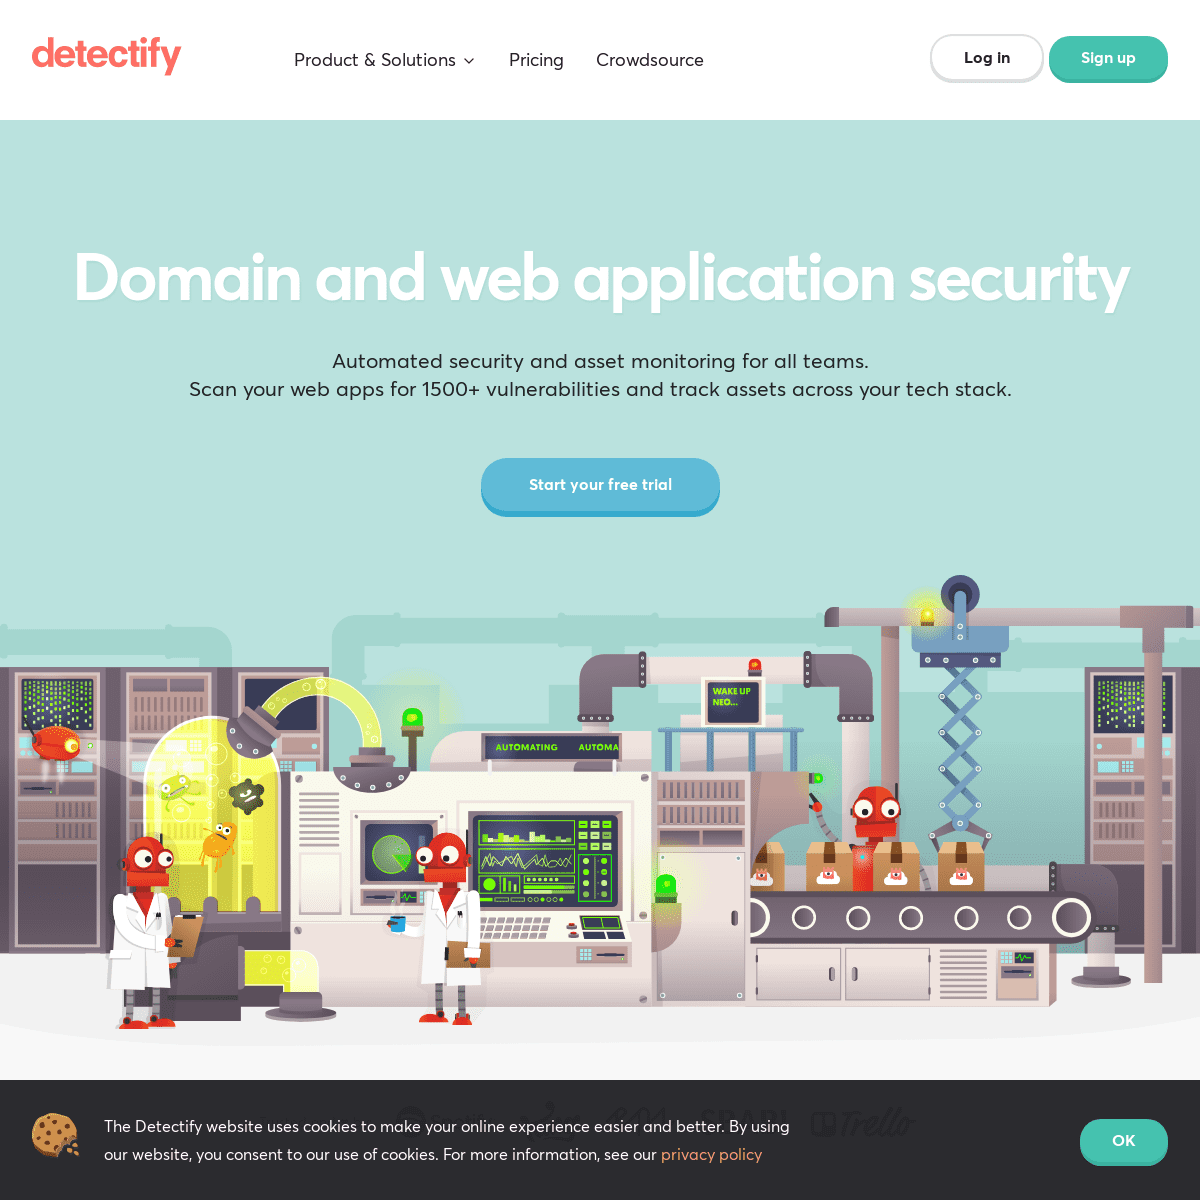 A complete backup of detectify.com